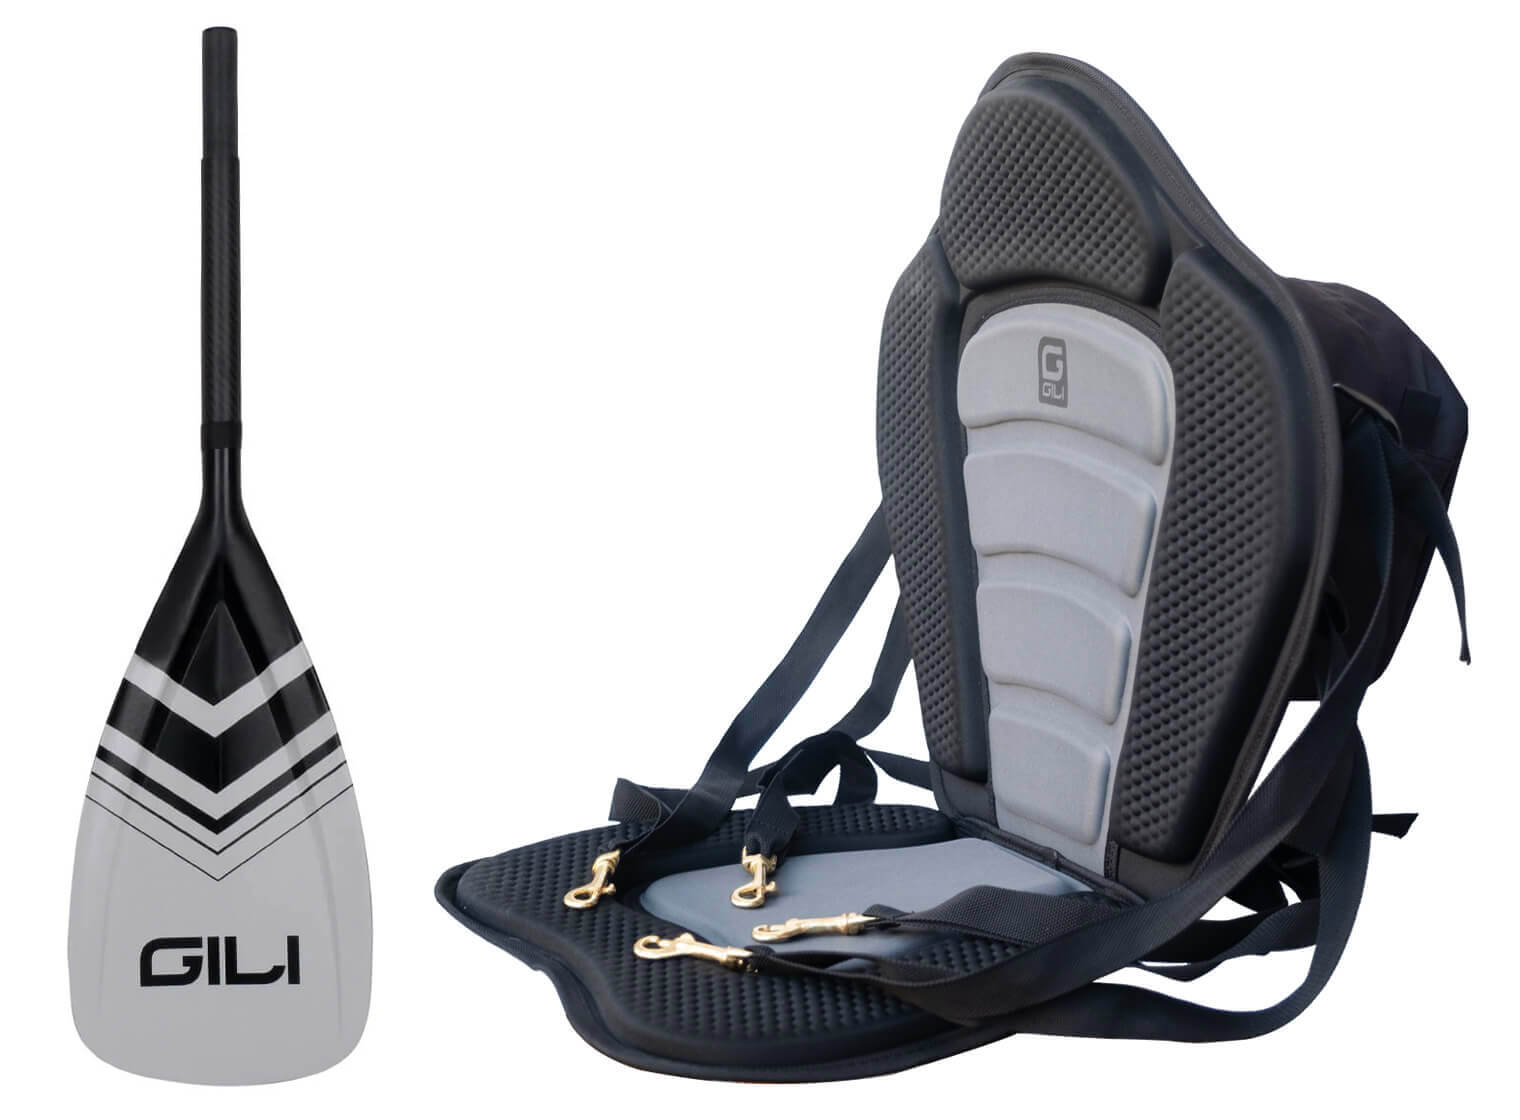 signmeili Adjustable Paddle Board Seat, Marine Kayak Seat Canoe Seat with  Detachable Back Storage Bag, Boat Seat High Backrest Chair Conversion Seat